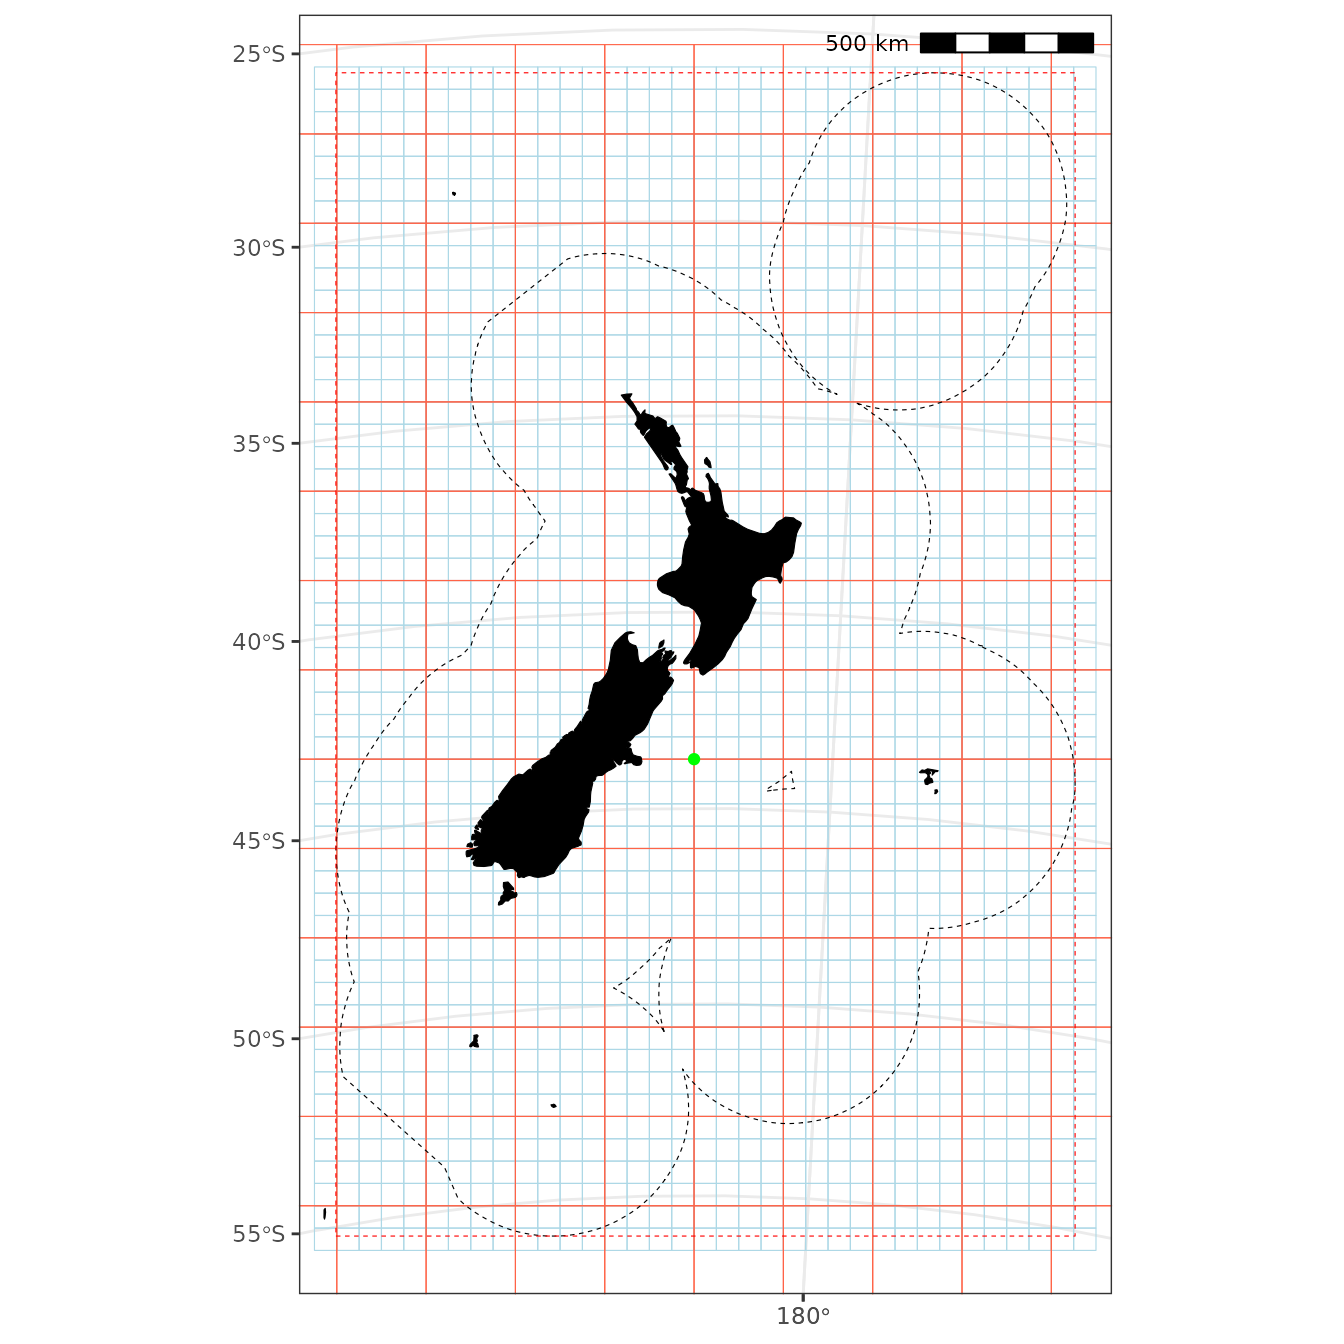 Figure 1: The New Zealand EEZ (dashed black lines), a box bounding the EEZ (dashed red lines), a 50 x 50 km grid (blue lines), a 200 x 200 km grid (red lines), and the origin (green point).